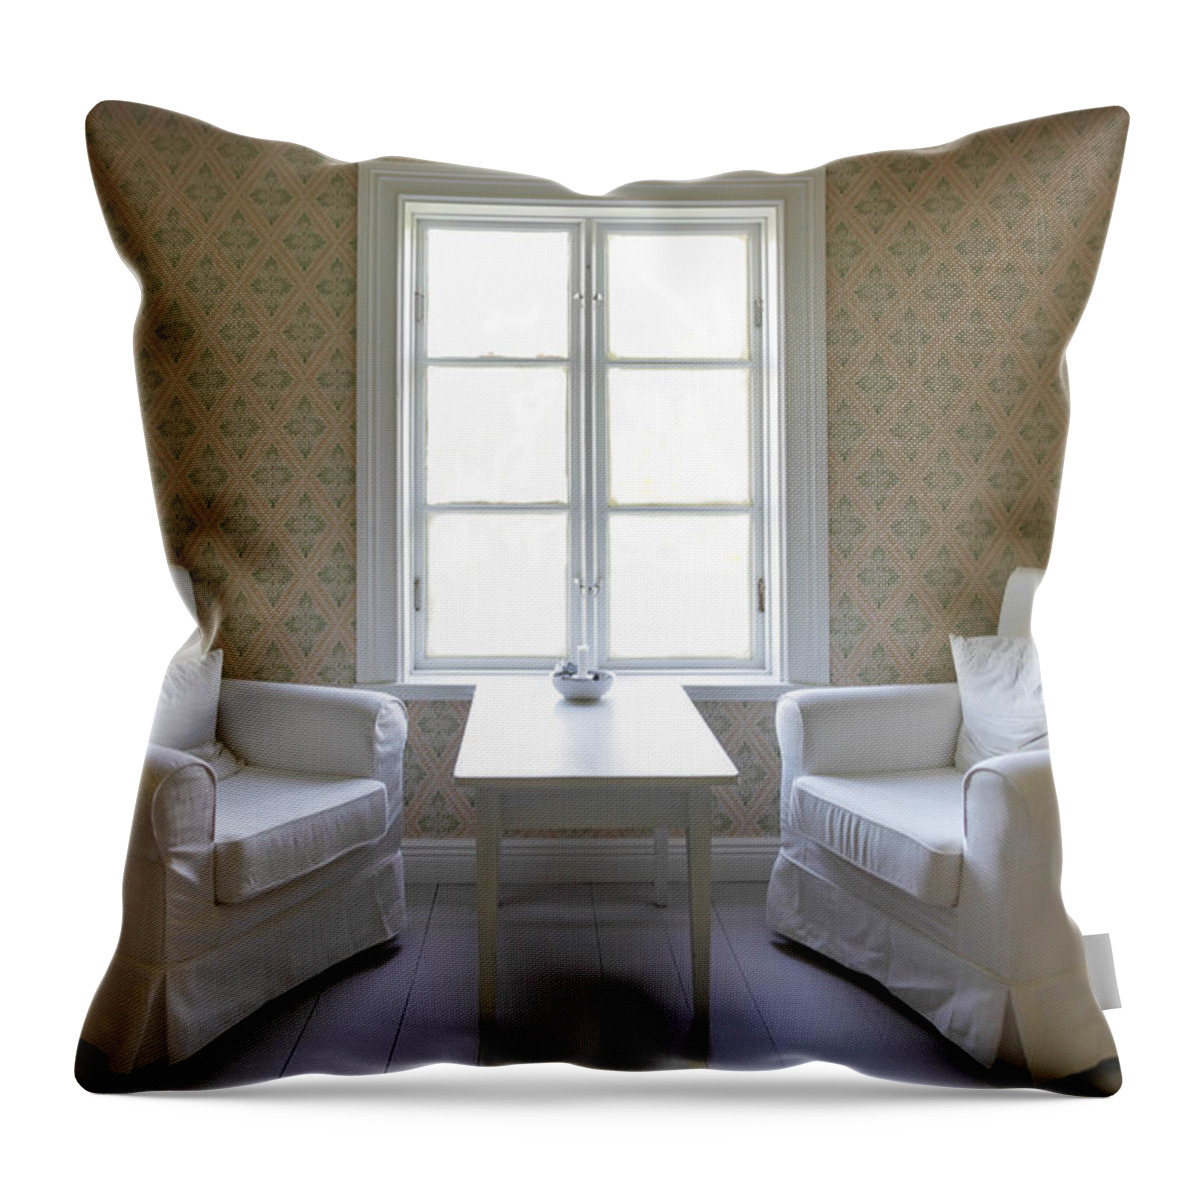 Architecture Throw Pillow featuring the photograph Two Interior Chairs A Table And A Window by Jo Ann Tomaselli